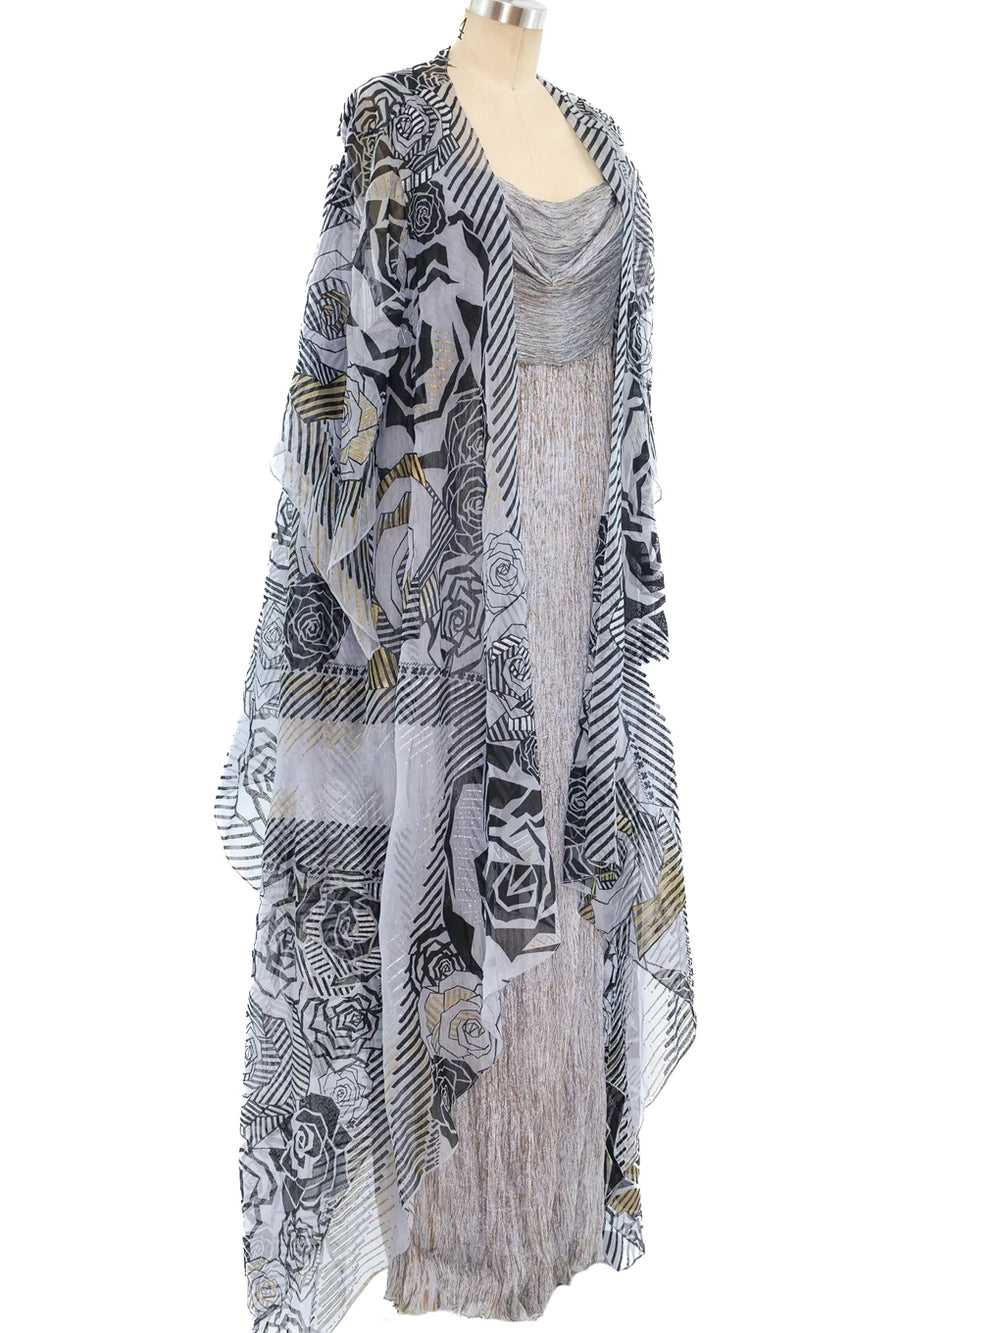 Zandra Rhodes Pleated Column Dress with Duster - image 3